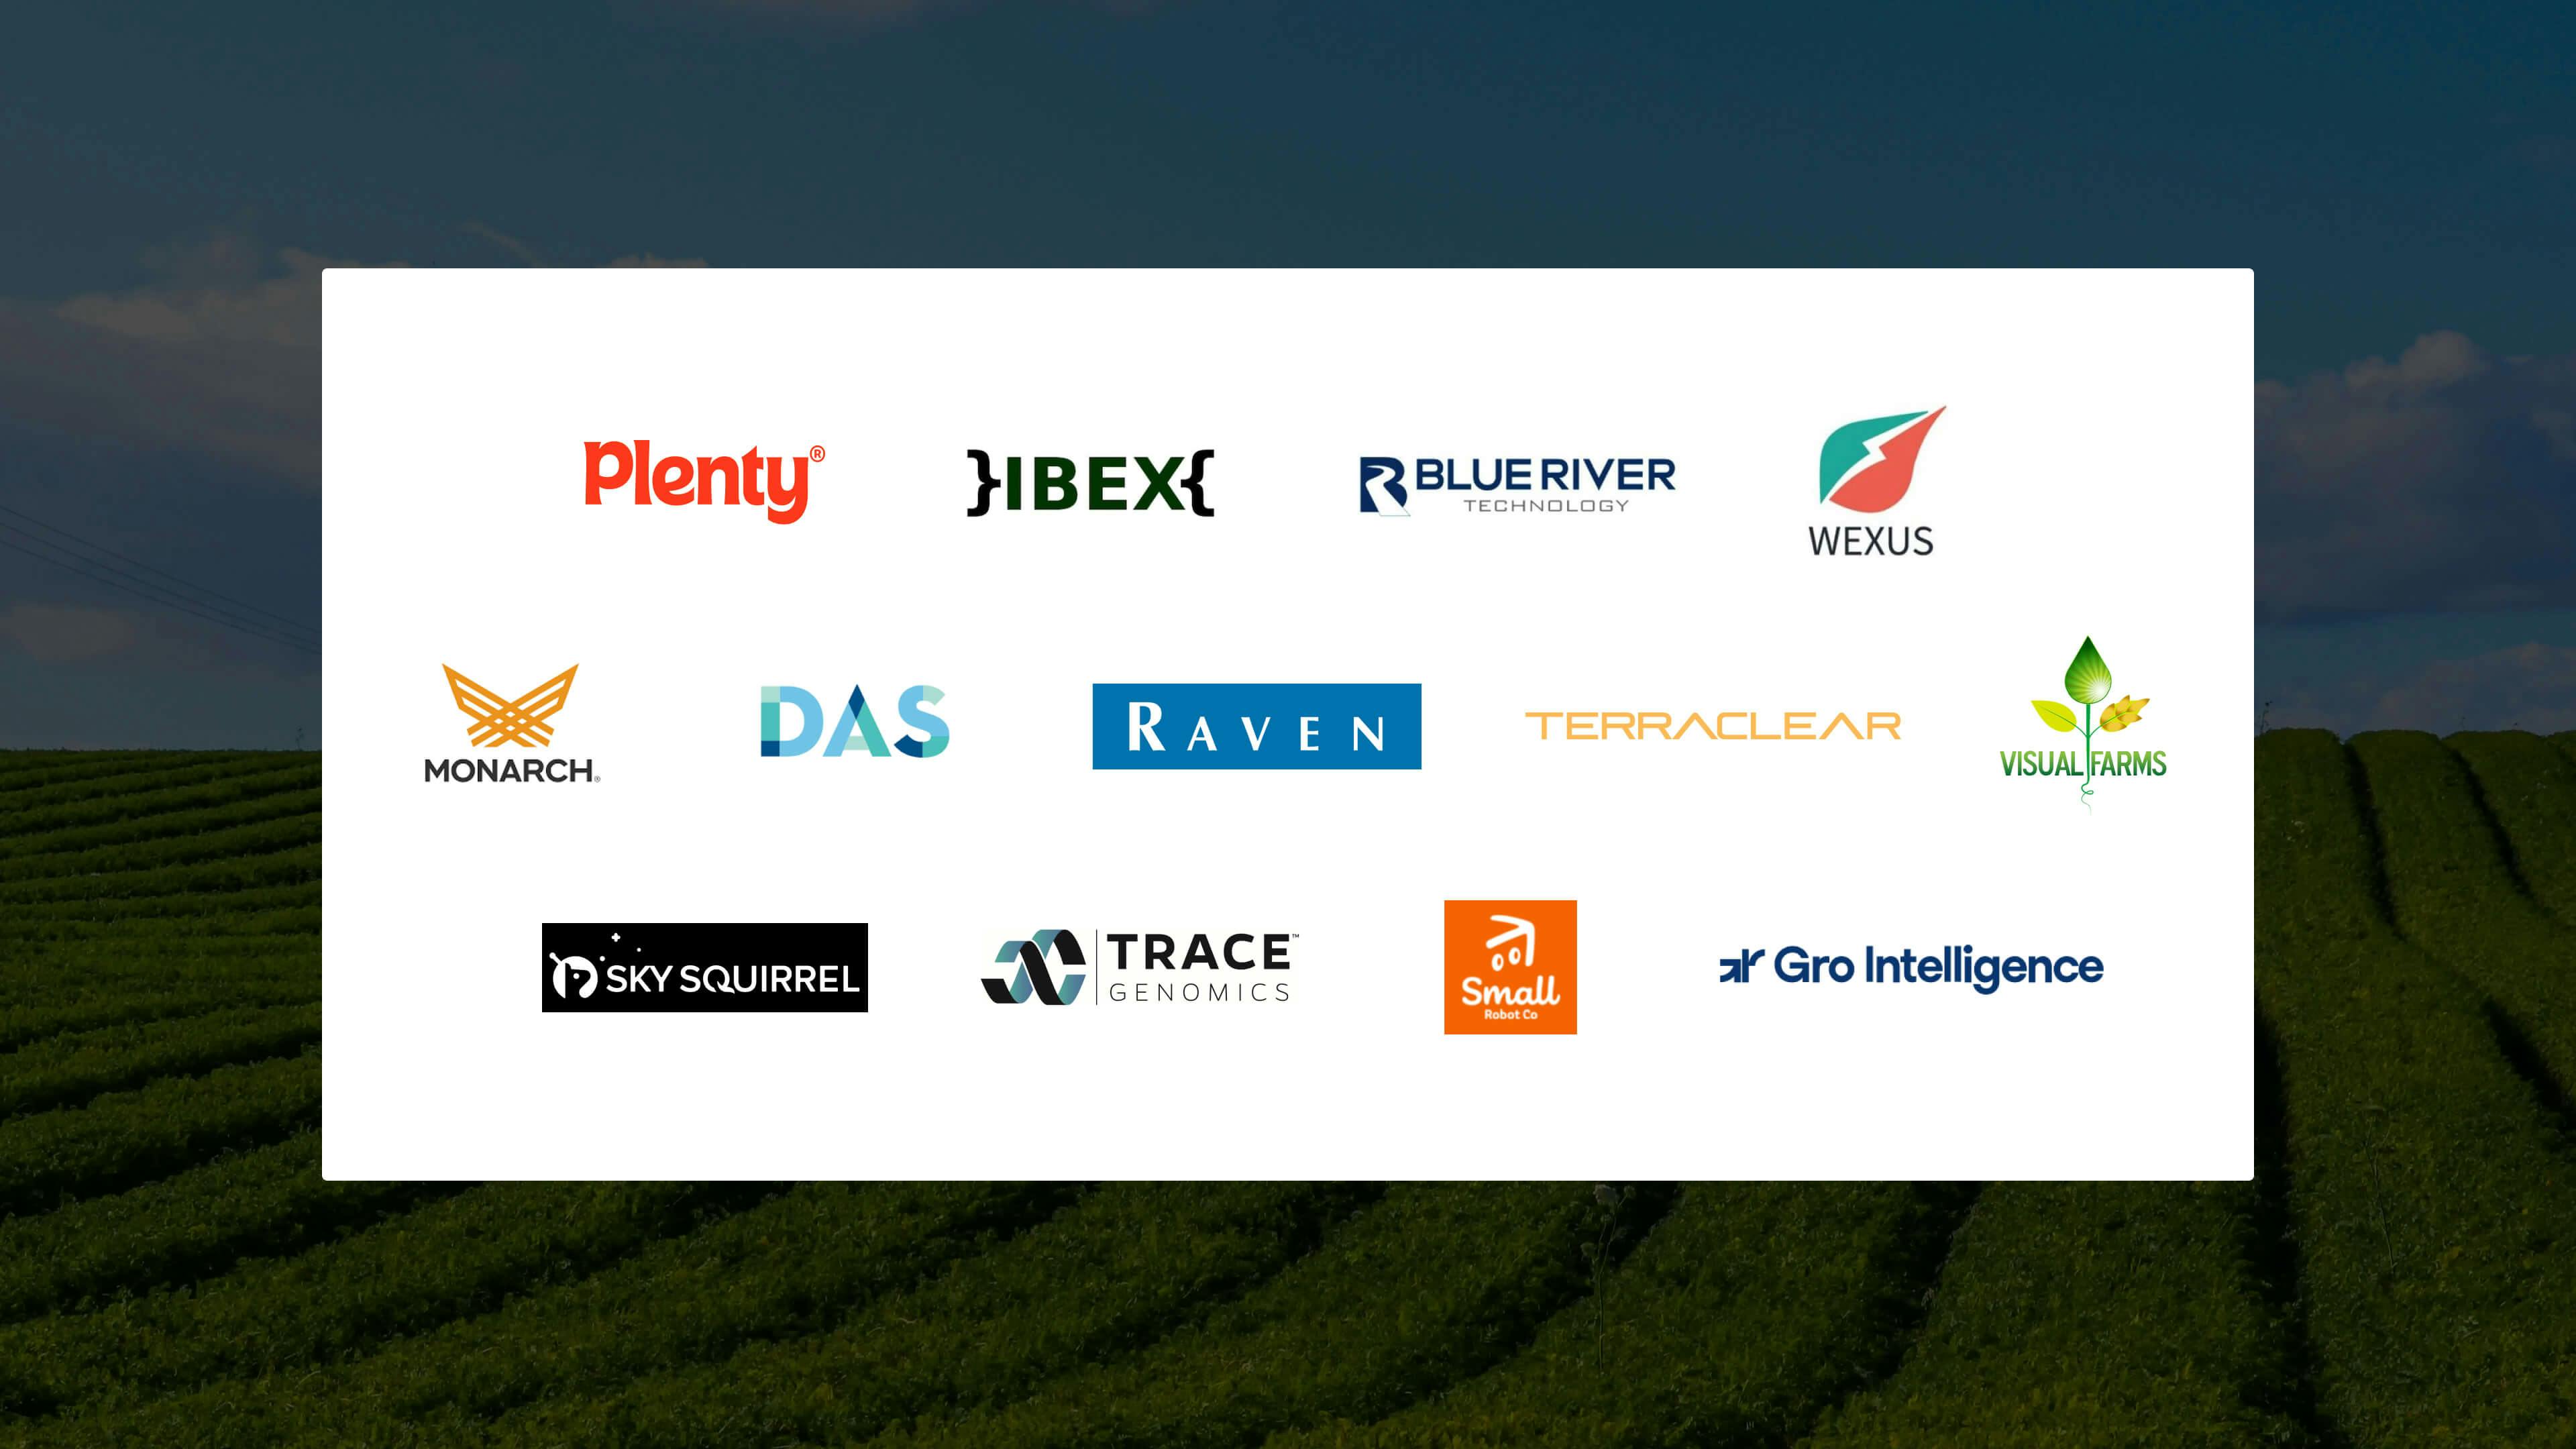 Image of top agritech businesses utilizing computer vision tools to revolutionize their businesses.